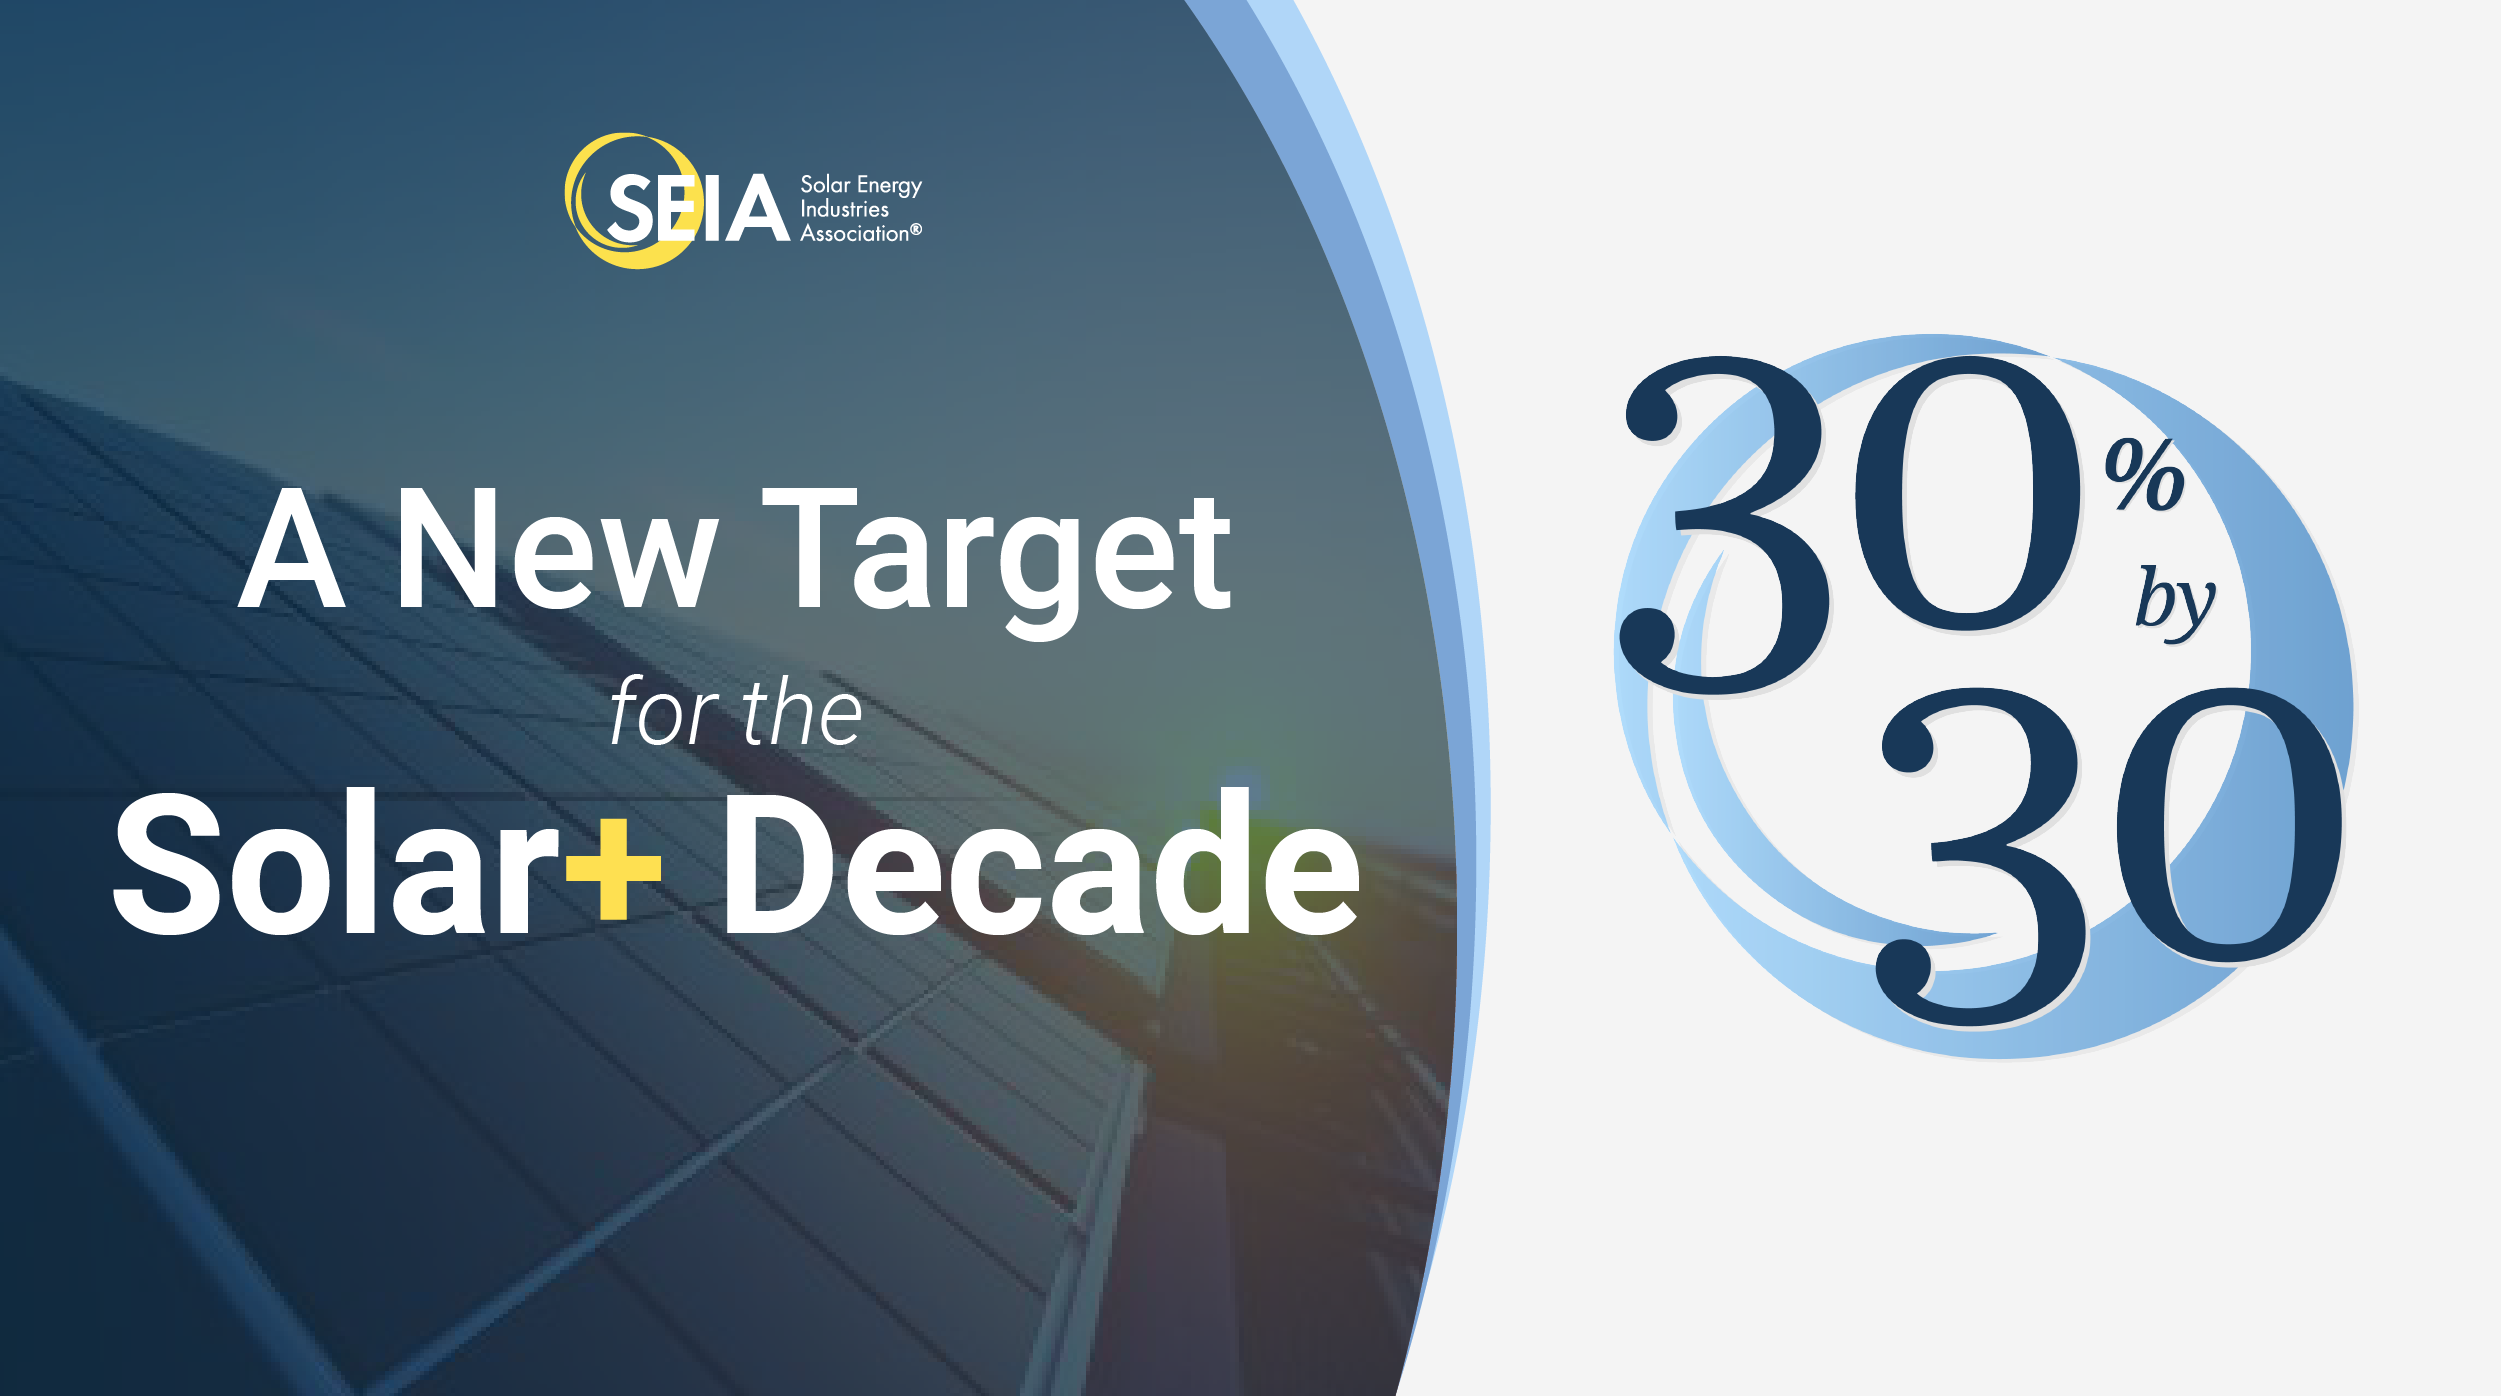 30% by 2030: A New Target for the Solar+ Decade